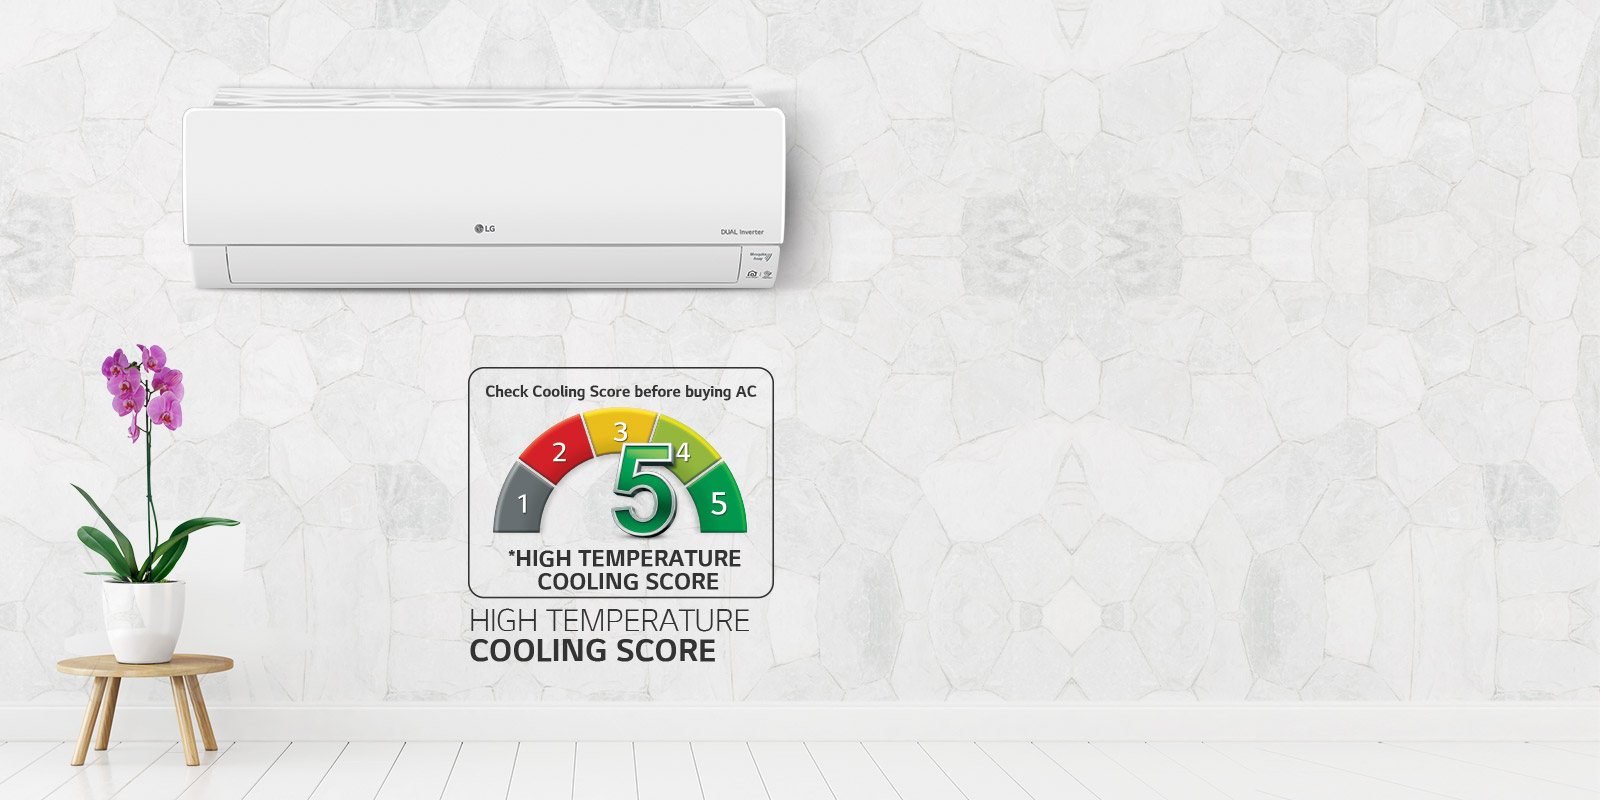 Gold Star Wall Air Conditioner User Manual